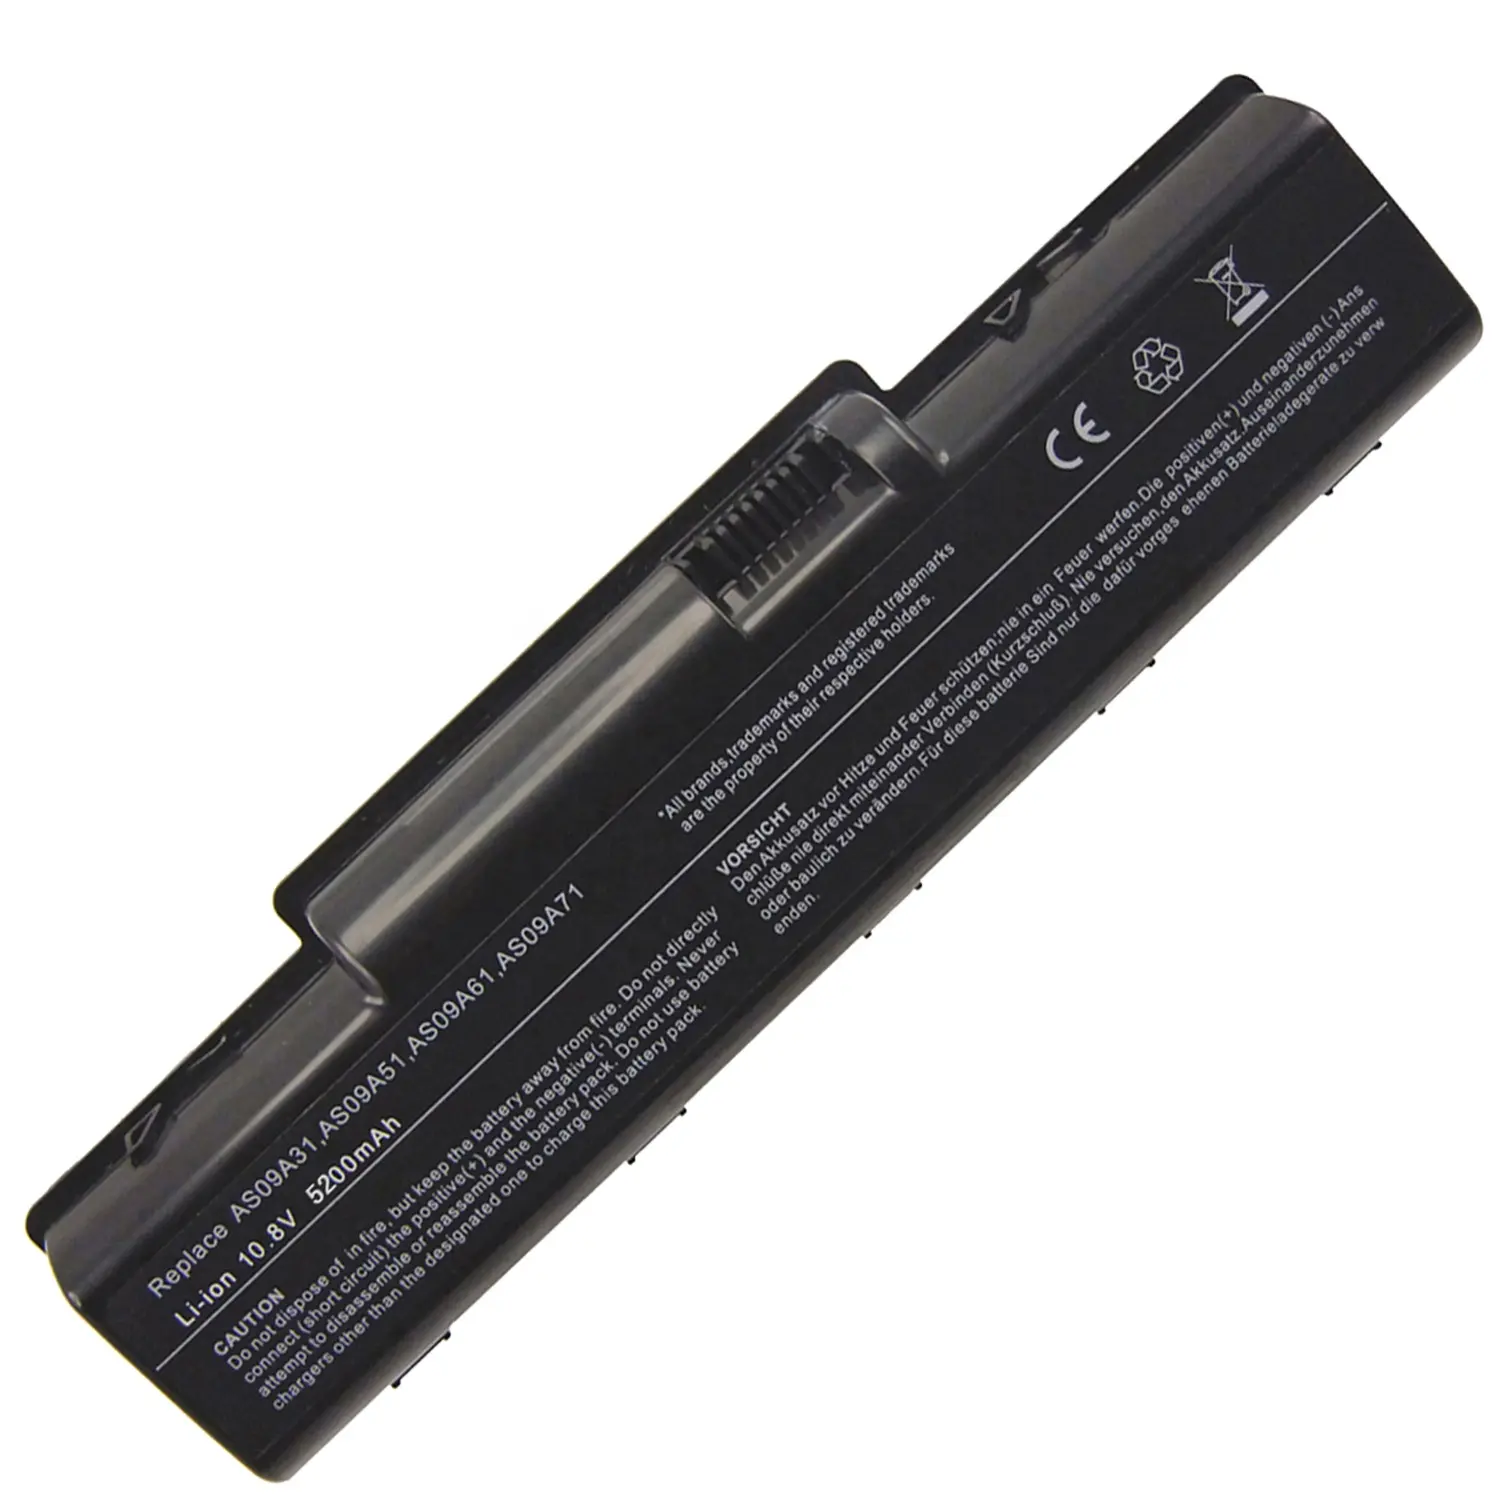 Replacement laptop battery for Acer AS09A3 AS09A51 AS09A61 AS09A71 Aspire 4732 5532 5732Z